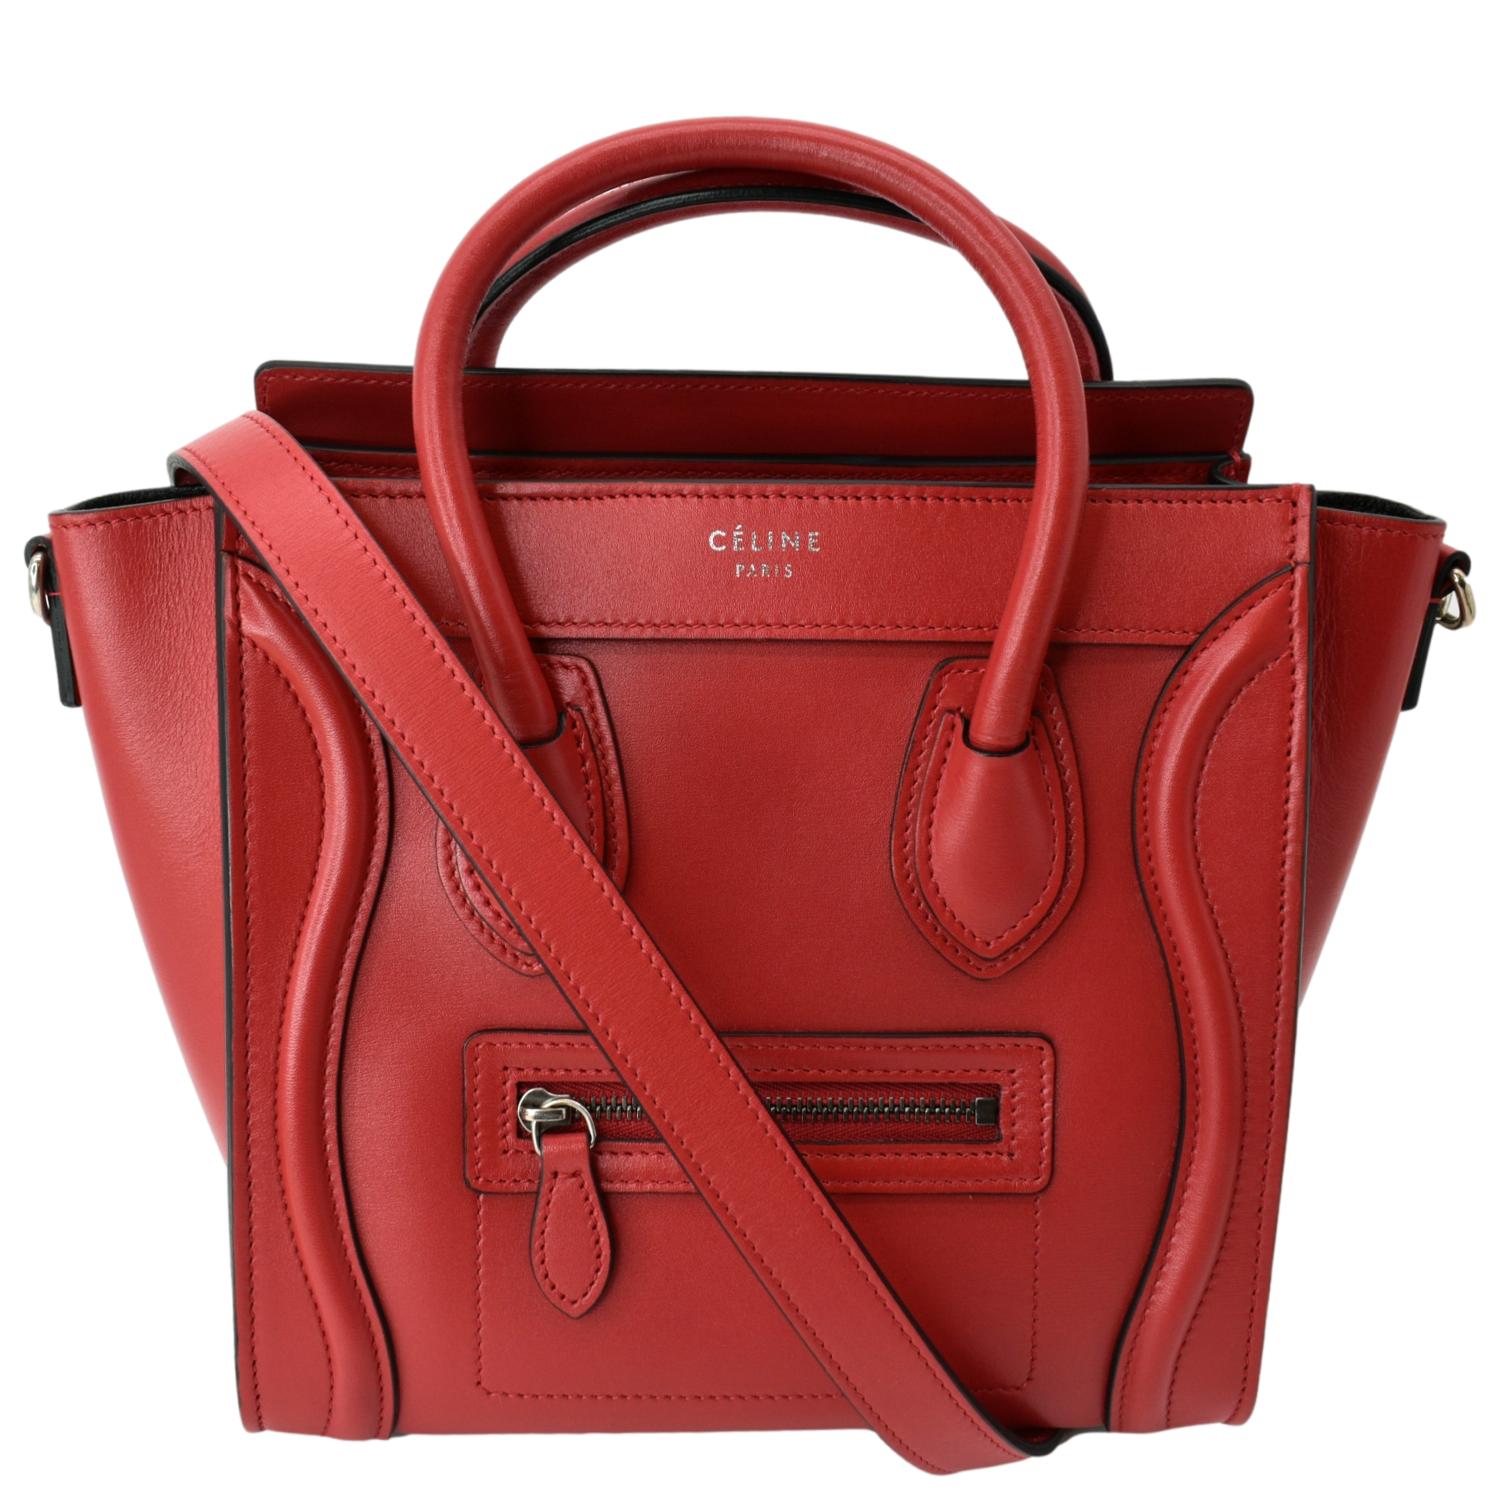 Celine 2018 PVC Shopping Bag with Solo Pouch Red